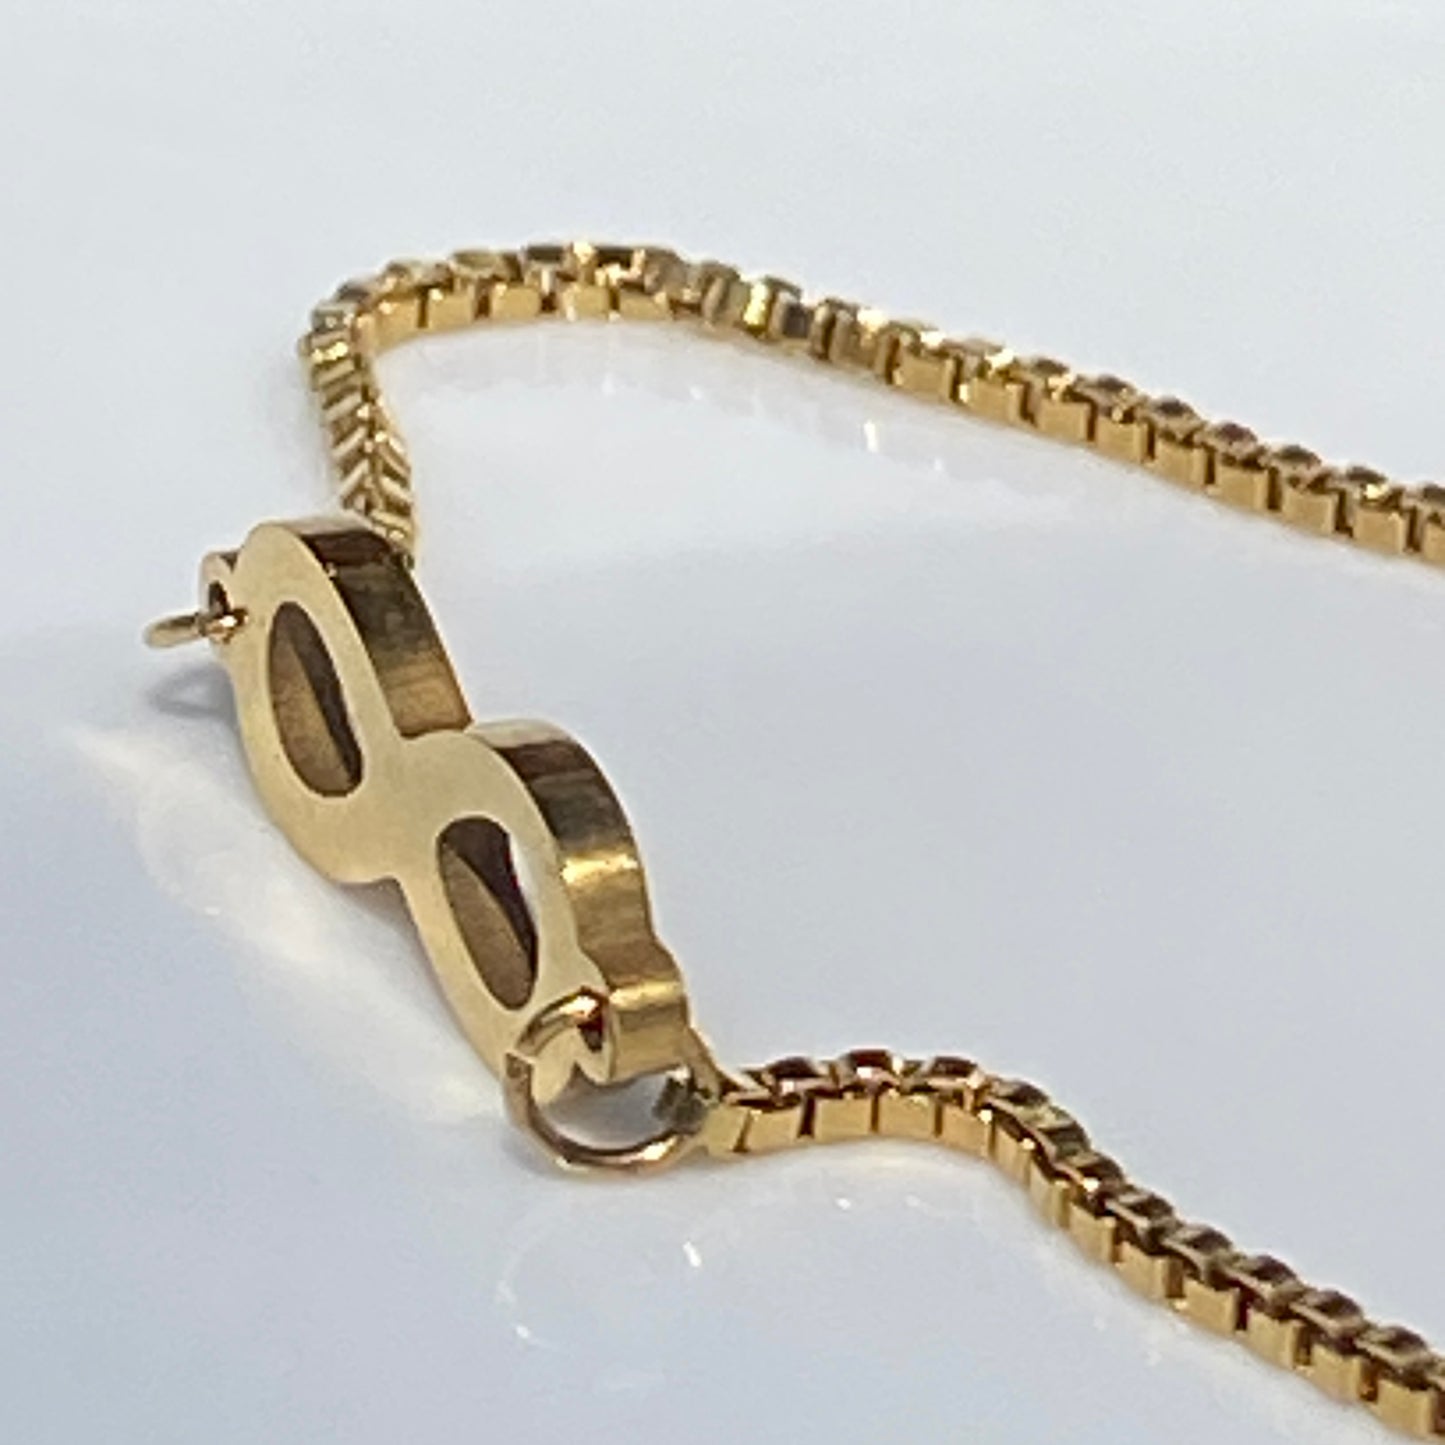 18 kt Gold Plated Stainless Steel Infinity Box Chain Necklace